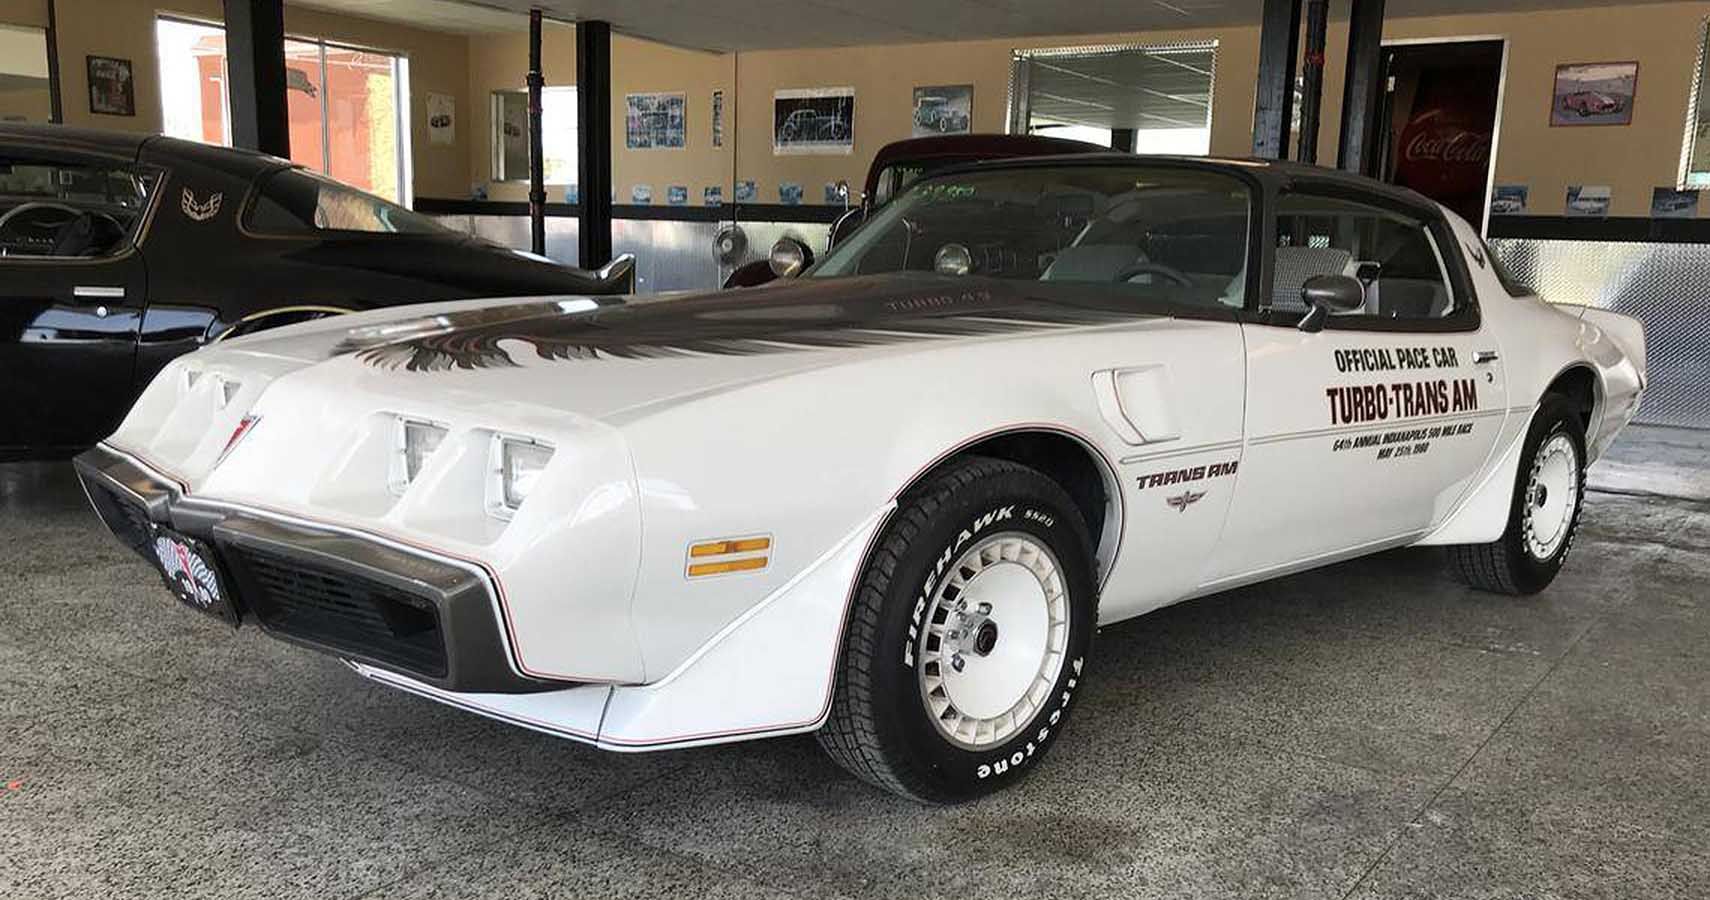 1980 Pontiac Trans-Am Turbo: Plagued With Problems